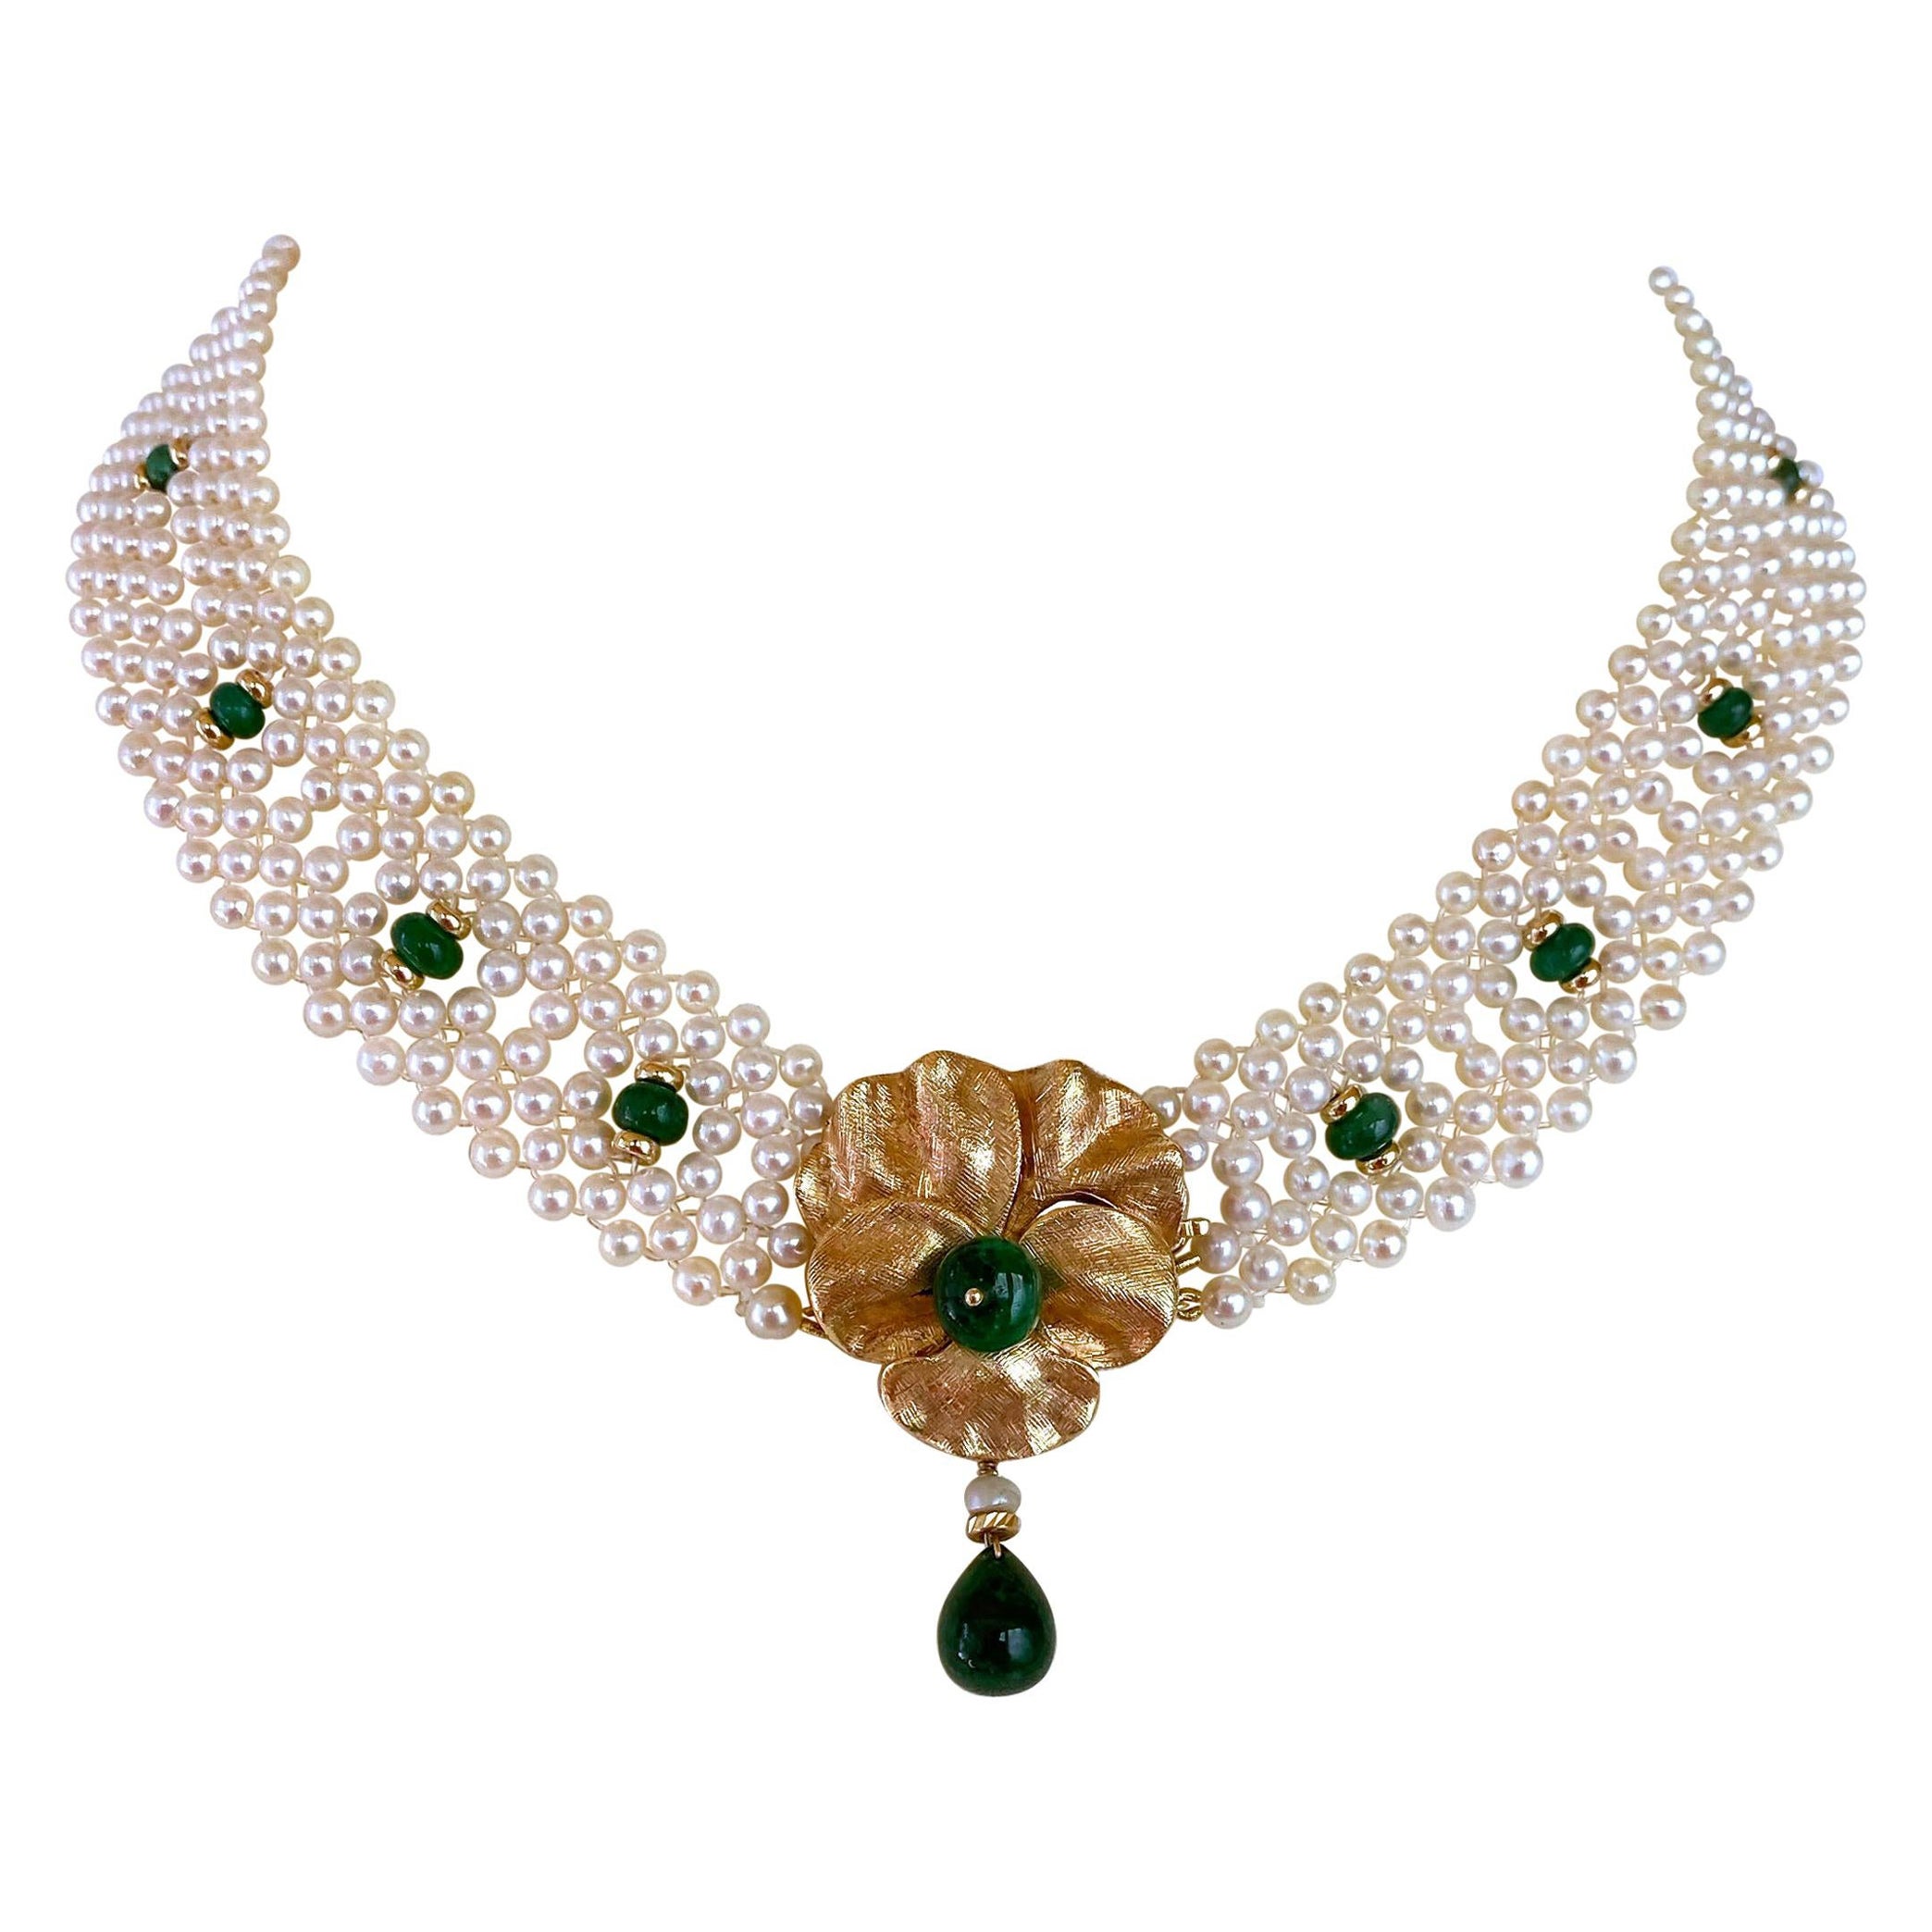 Marina J Woven Pearl & Emerald Infinity Necklace with Vintage 14k Centerpiece